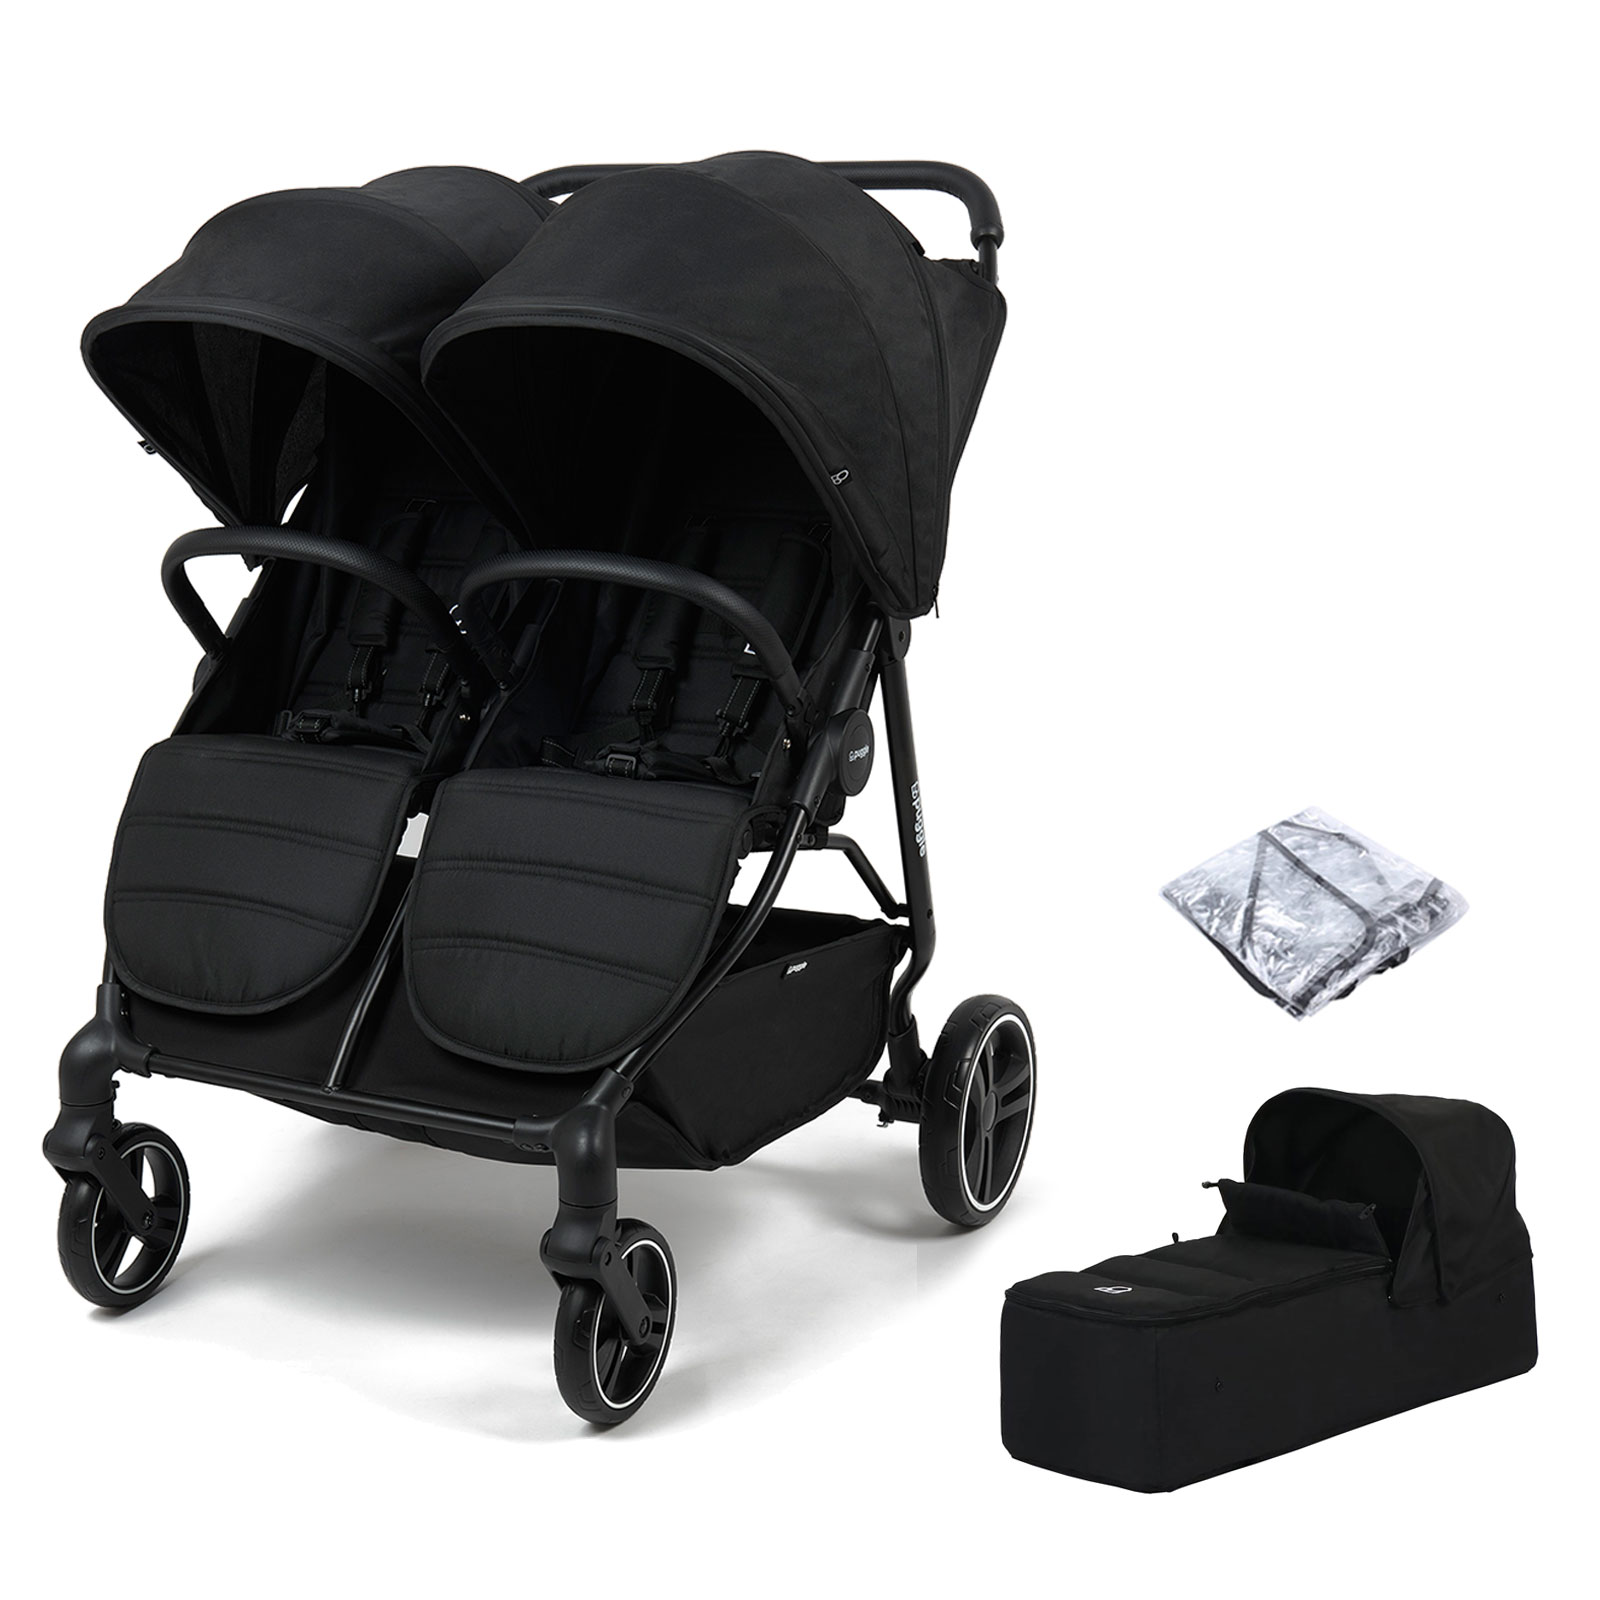 Puggle Urban City Easyfold Twin Double Pushchair With Soft Carrycot - Storm Black